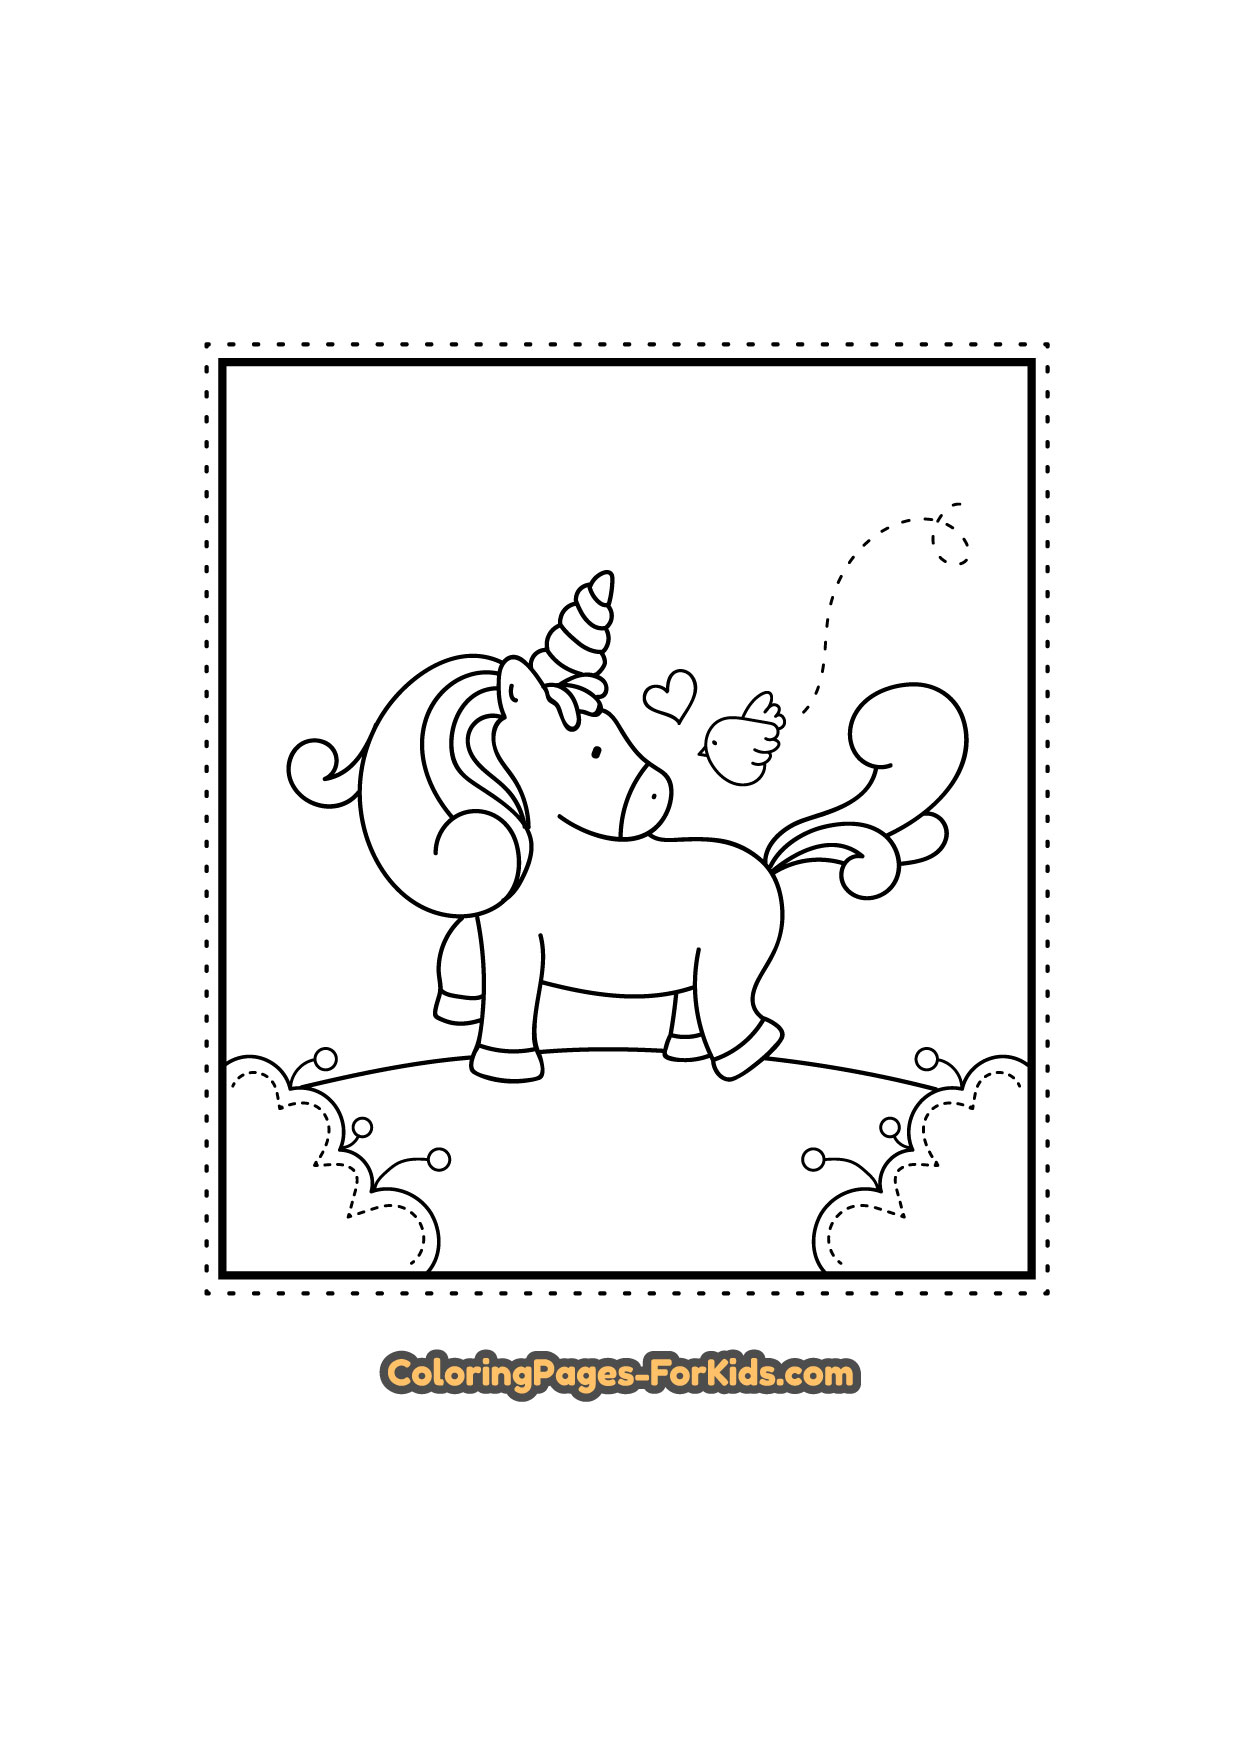 Free coloring pages for children: Unicorn